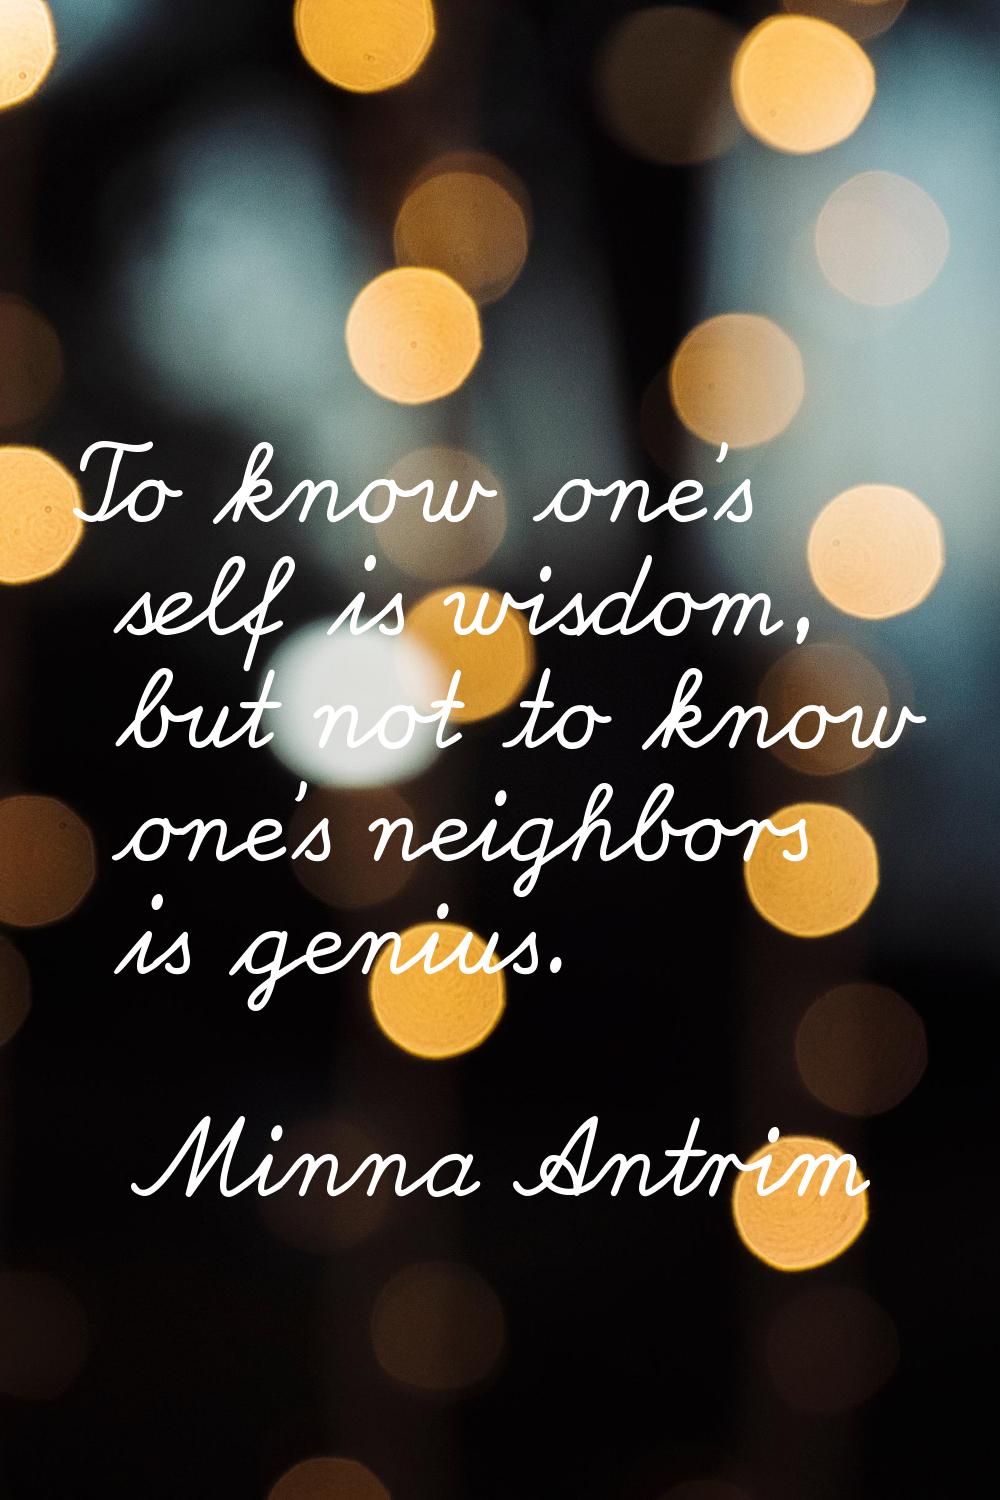 To know one's self is wisdom, but not to know one's neighbors is genius.